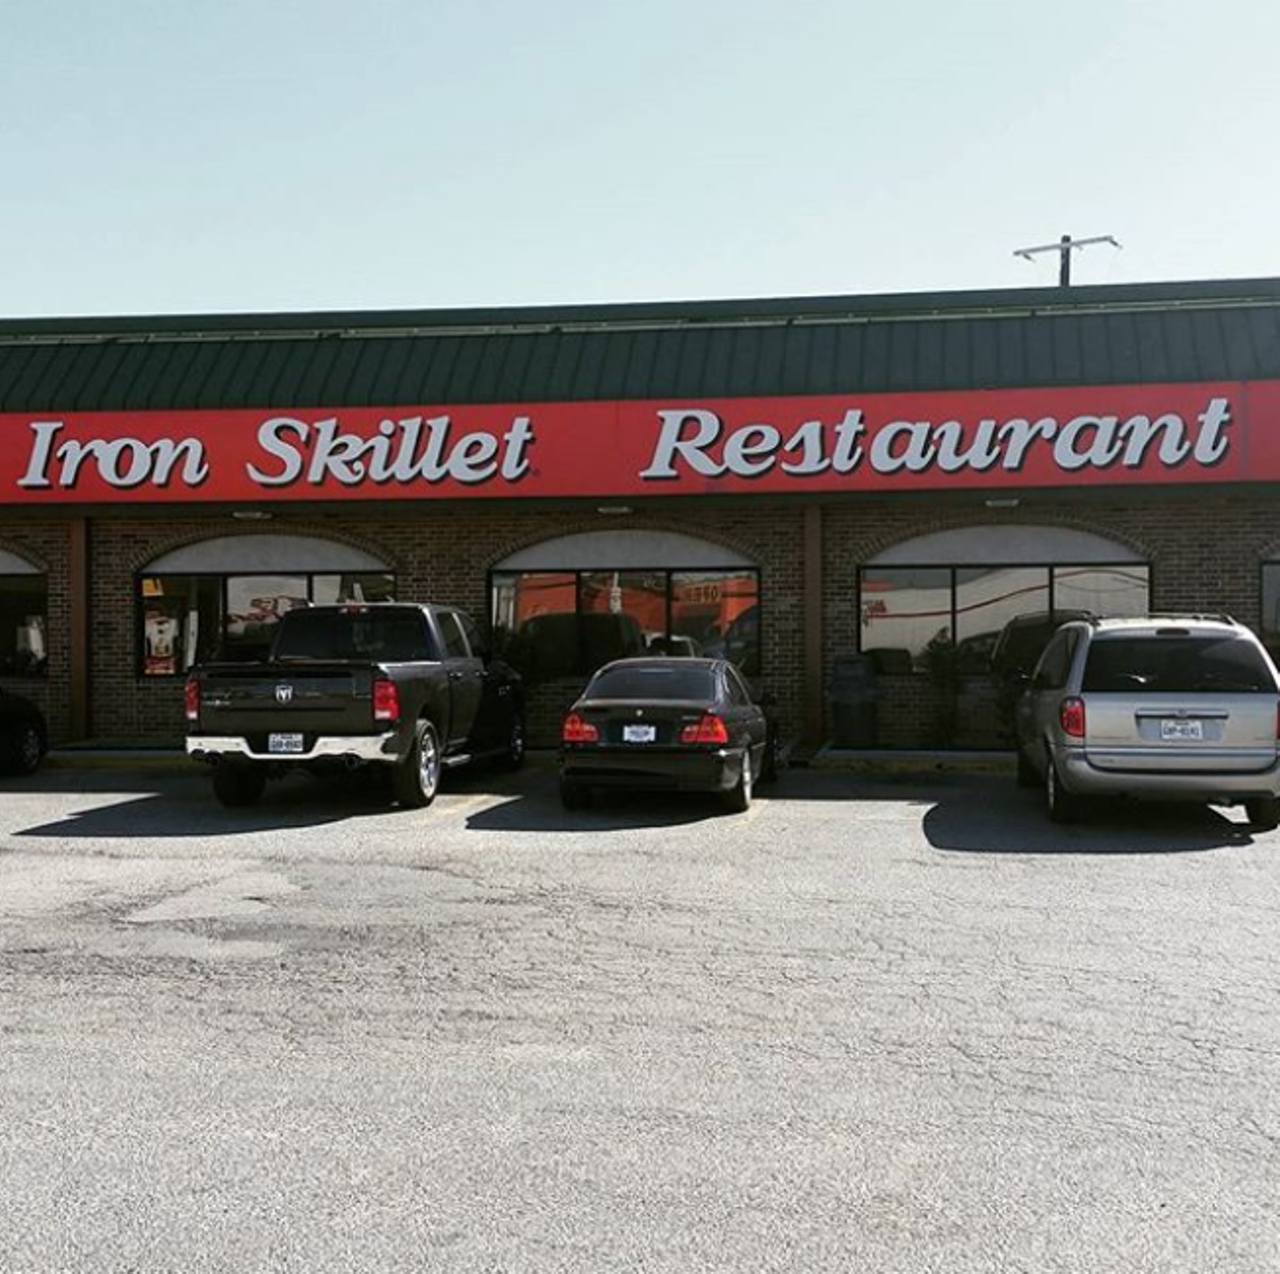 Iron Skillet
1112 Ackerman Road, (210) 661-9416, ta-petro.com
There’s something oddly satisfying about eating a greasy meal during the wee hours of the morning while on a road trip. Skip the miles and get some grub from Iron Skillet. A staple inside local TravelCenters of America, this eatery offers up American classics from the Southern tradition for breakfast to the Texas Steerburger for something much, much heartier.
Photo via bobgambert / Instagram